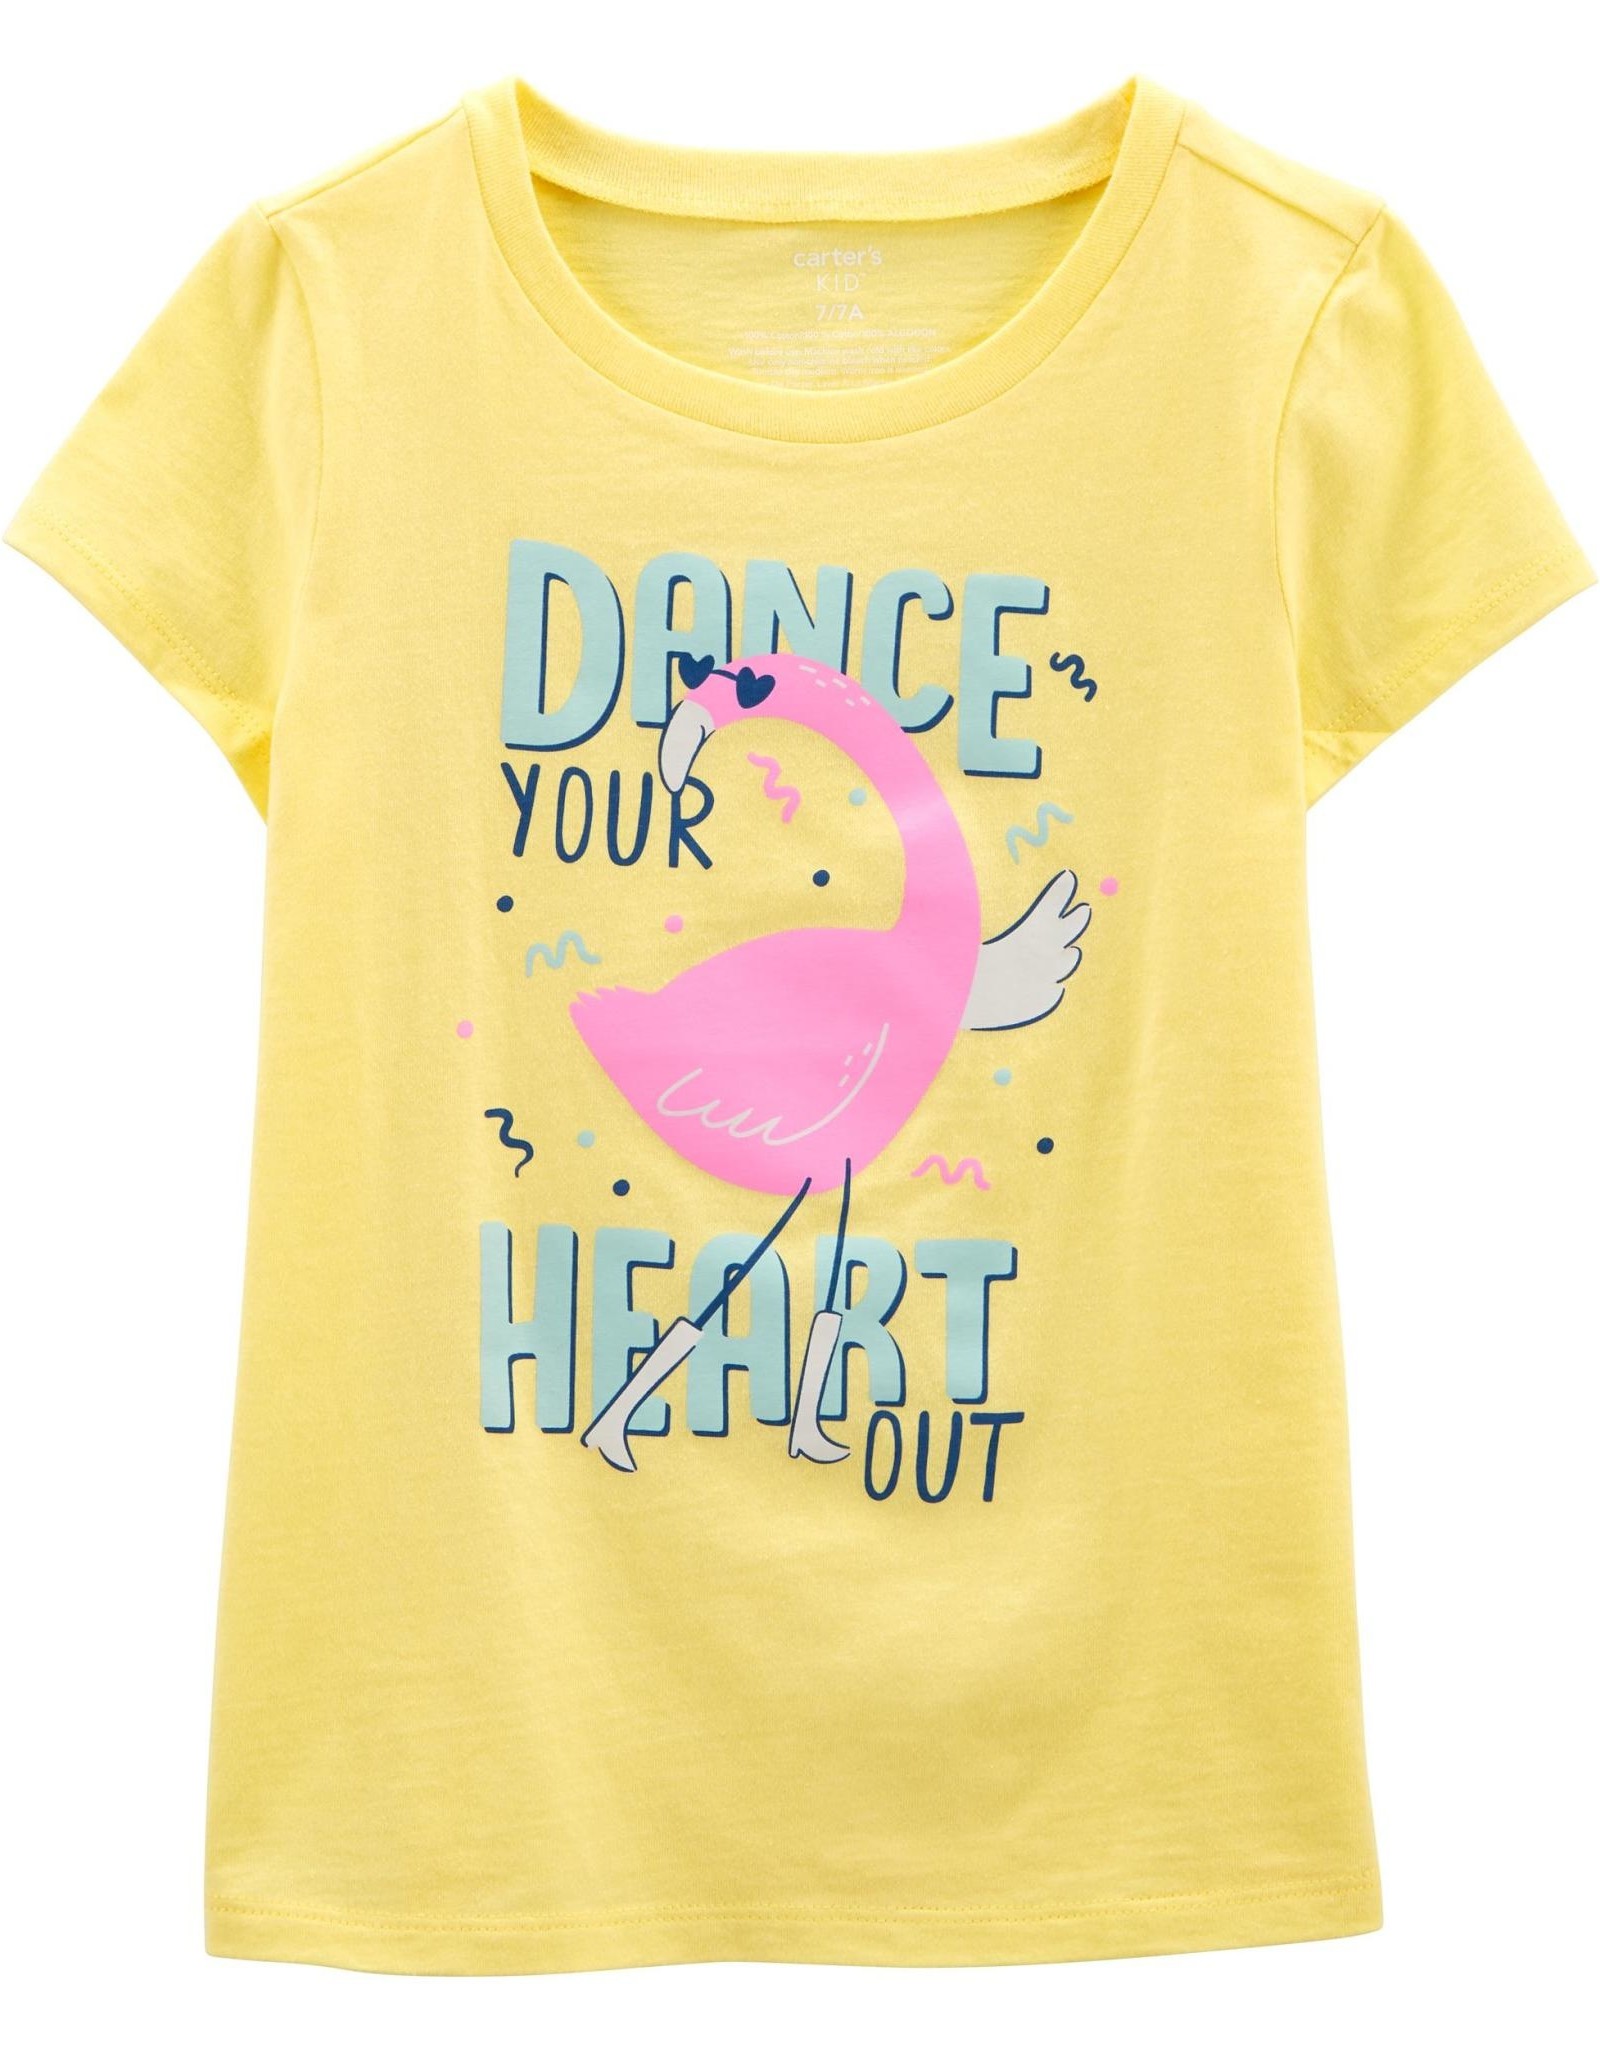 Carter's Youth Flamingo Dance Your Heart Out Jersey Tee